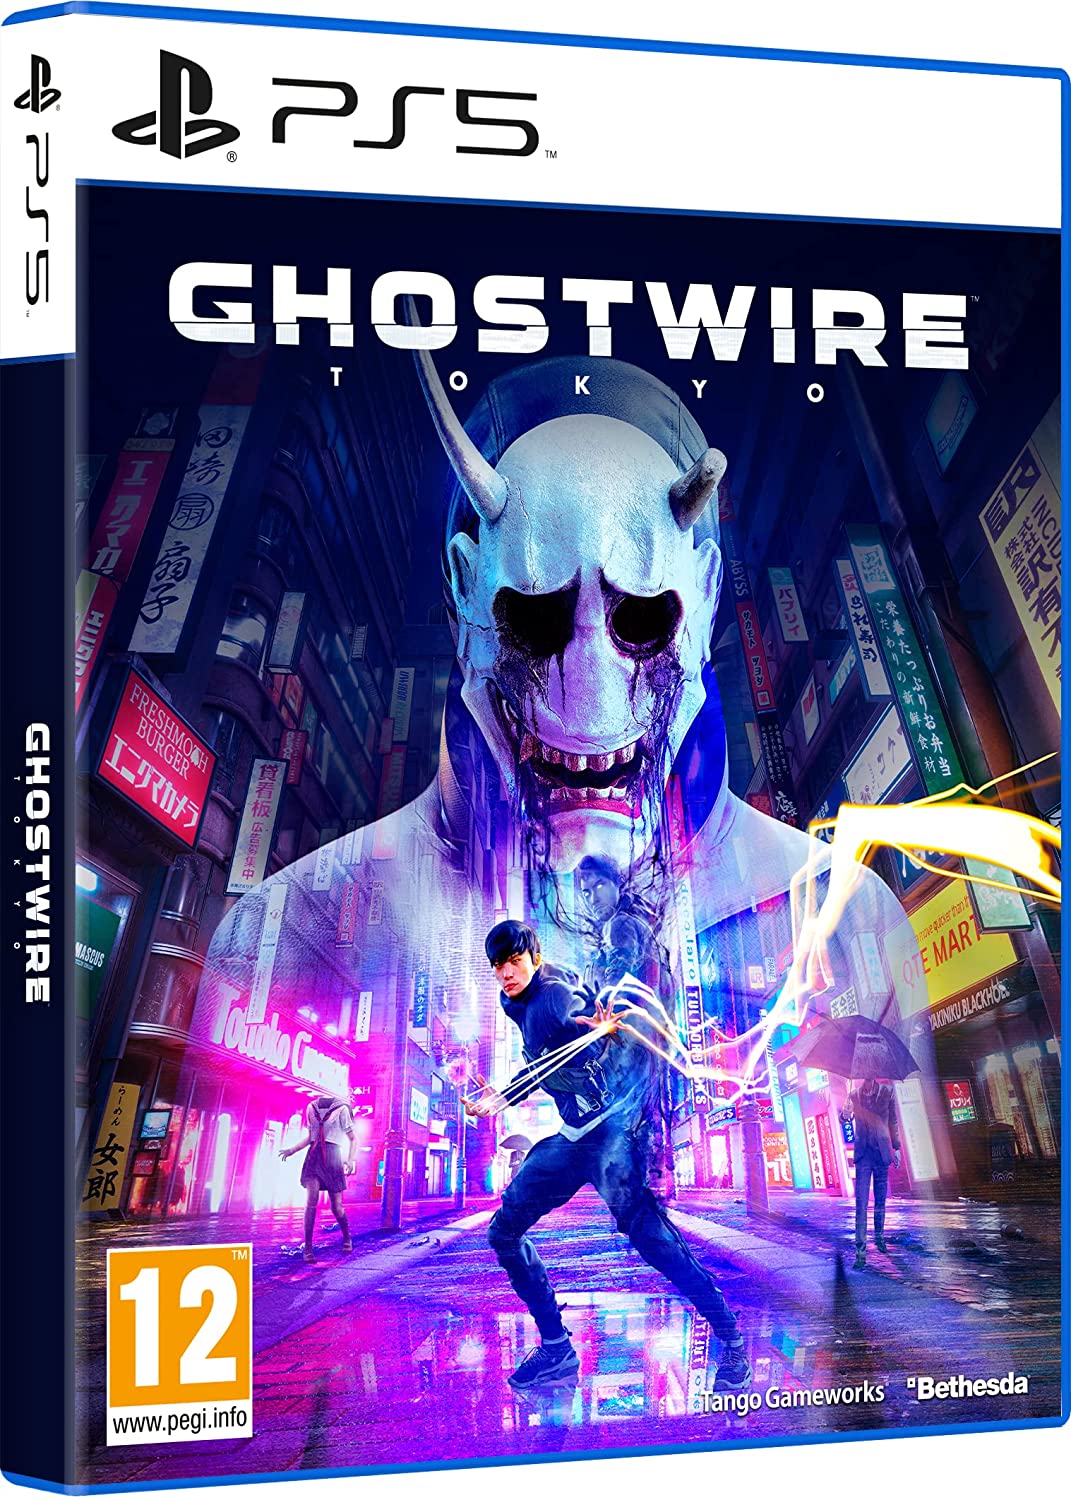 Ghostwire PS5 Game (PlayStation 5)